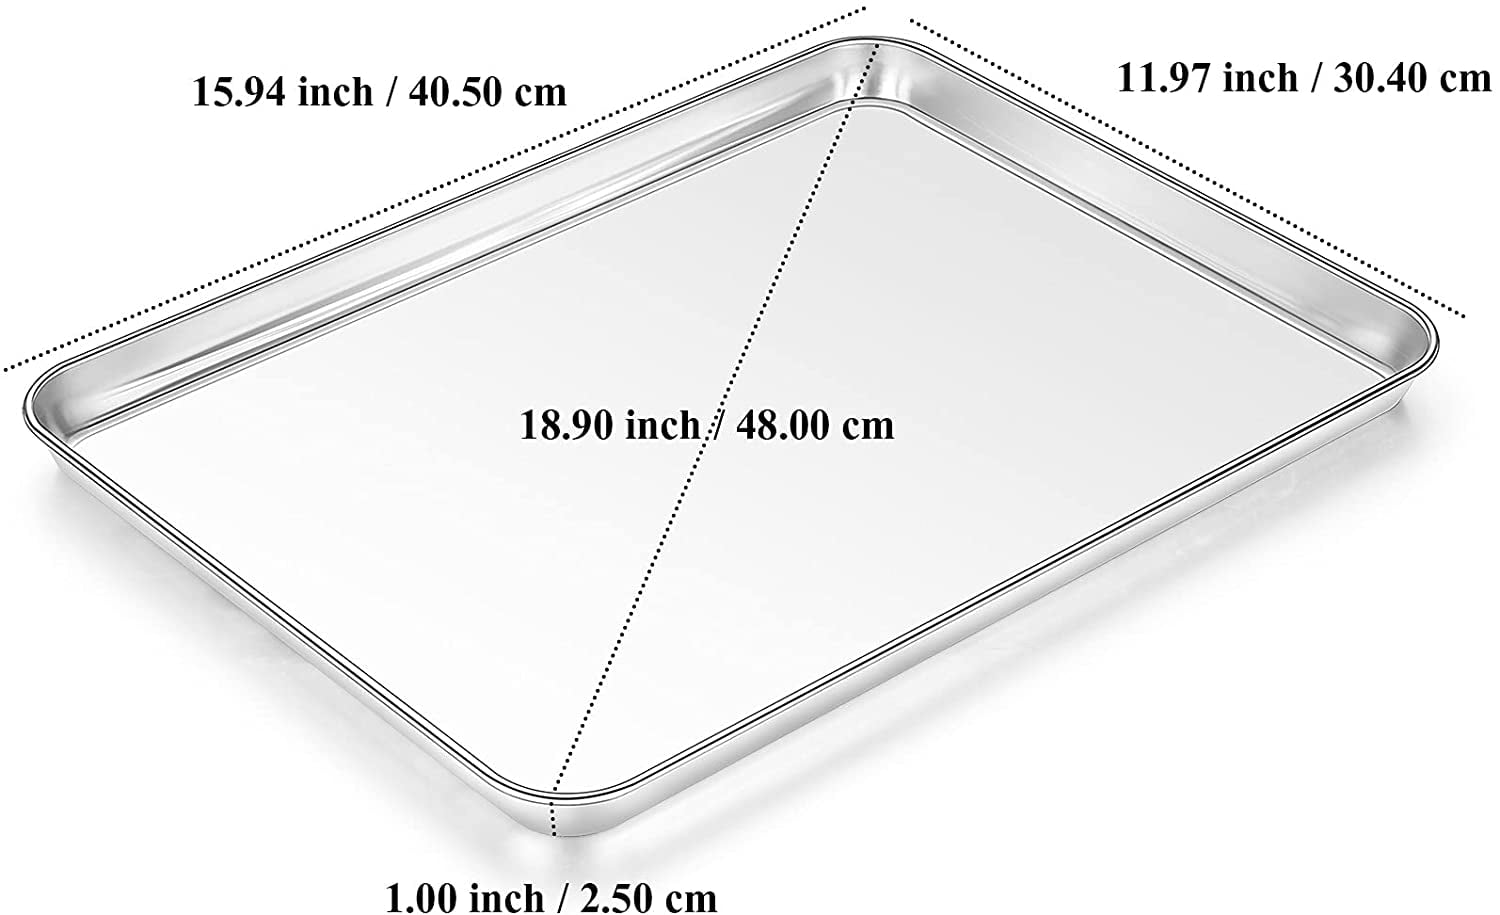 Happon Half Sheet Pans，Stainless Steel Cookie Sheets for Baking，Industrial  Grade Oven Bakeware Set